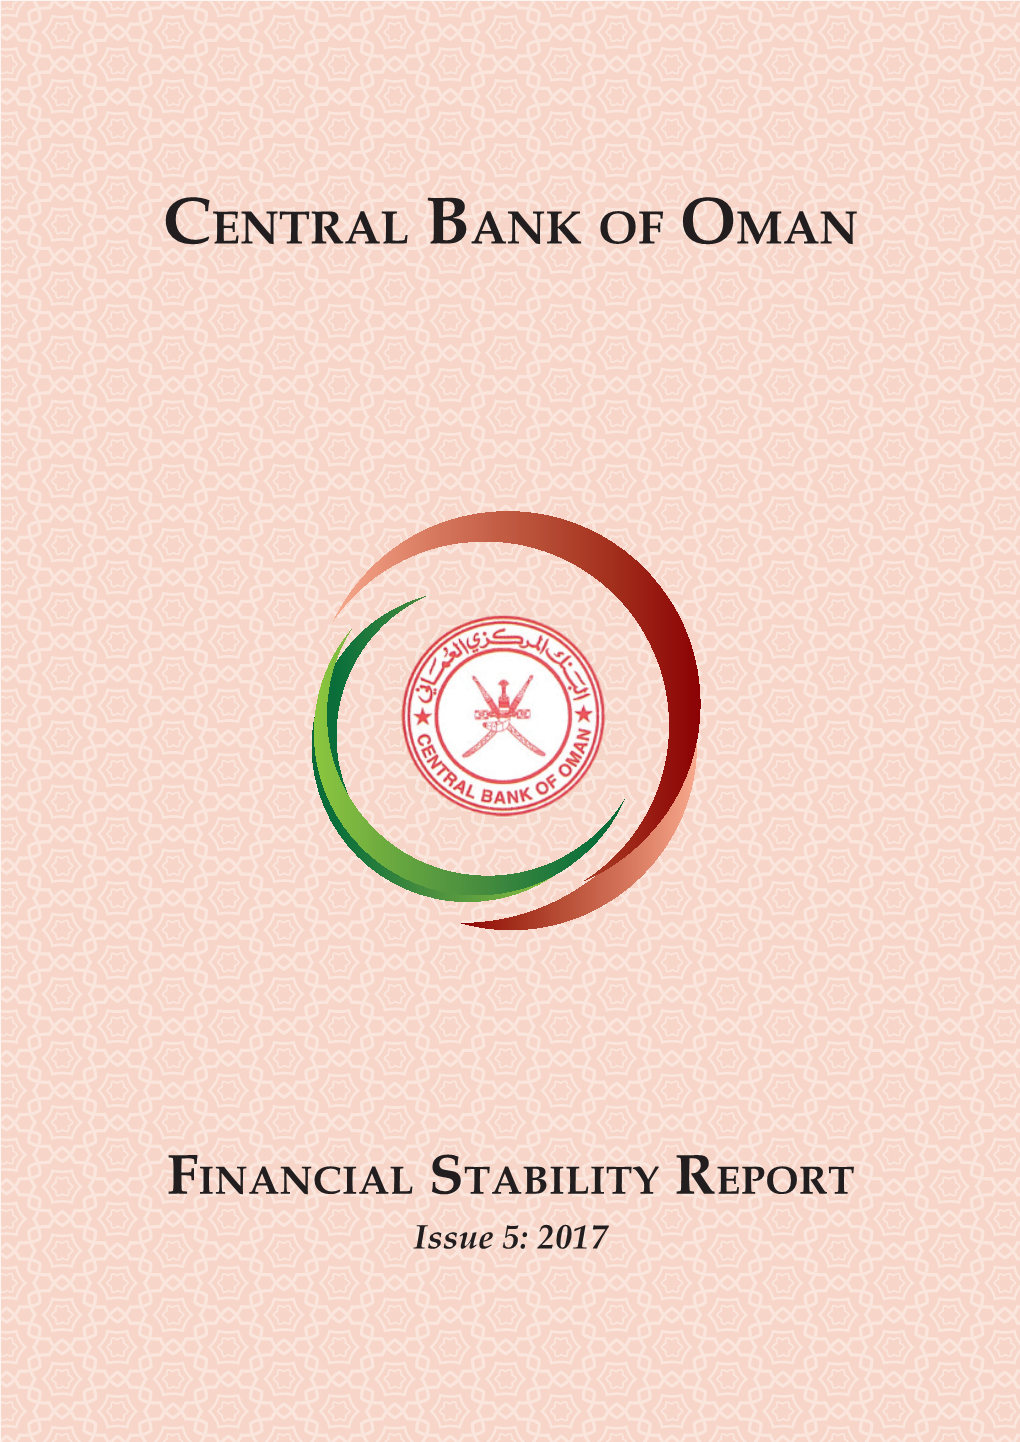 FINANCIAL STABILITY REPORT Issue 5: 2017 CENTRAL BANK of OMAN